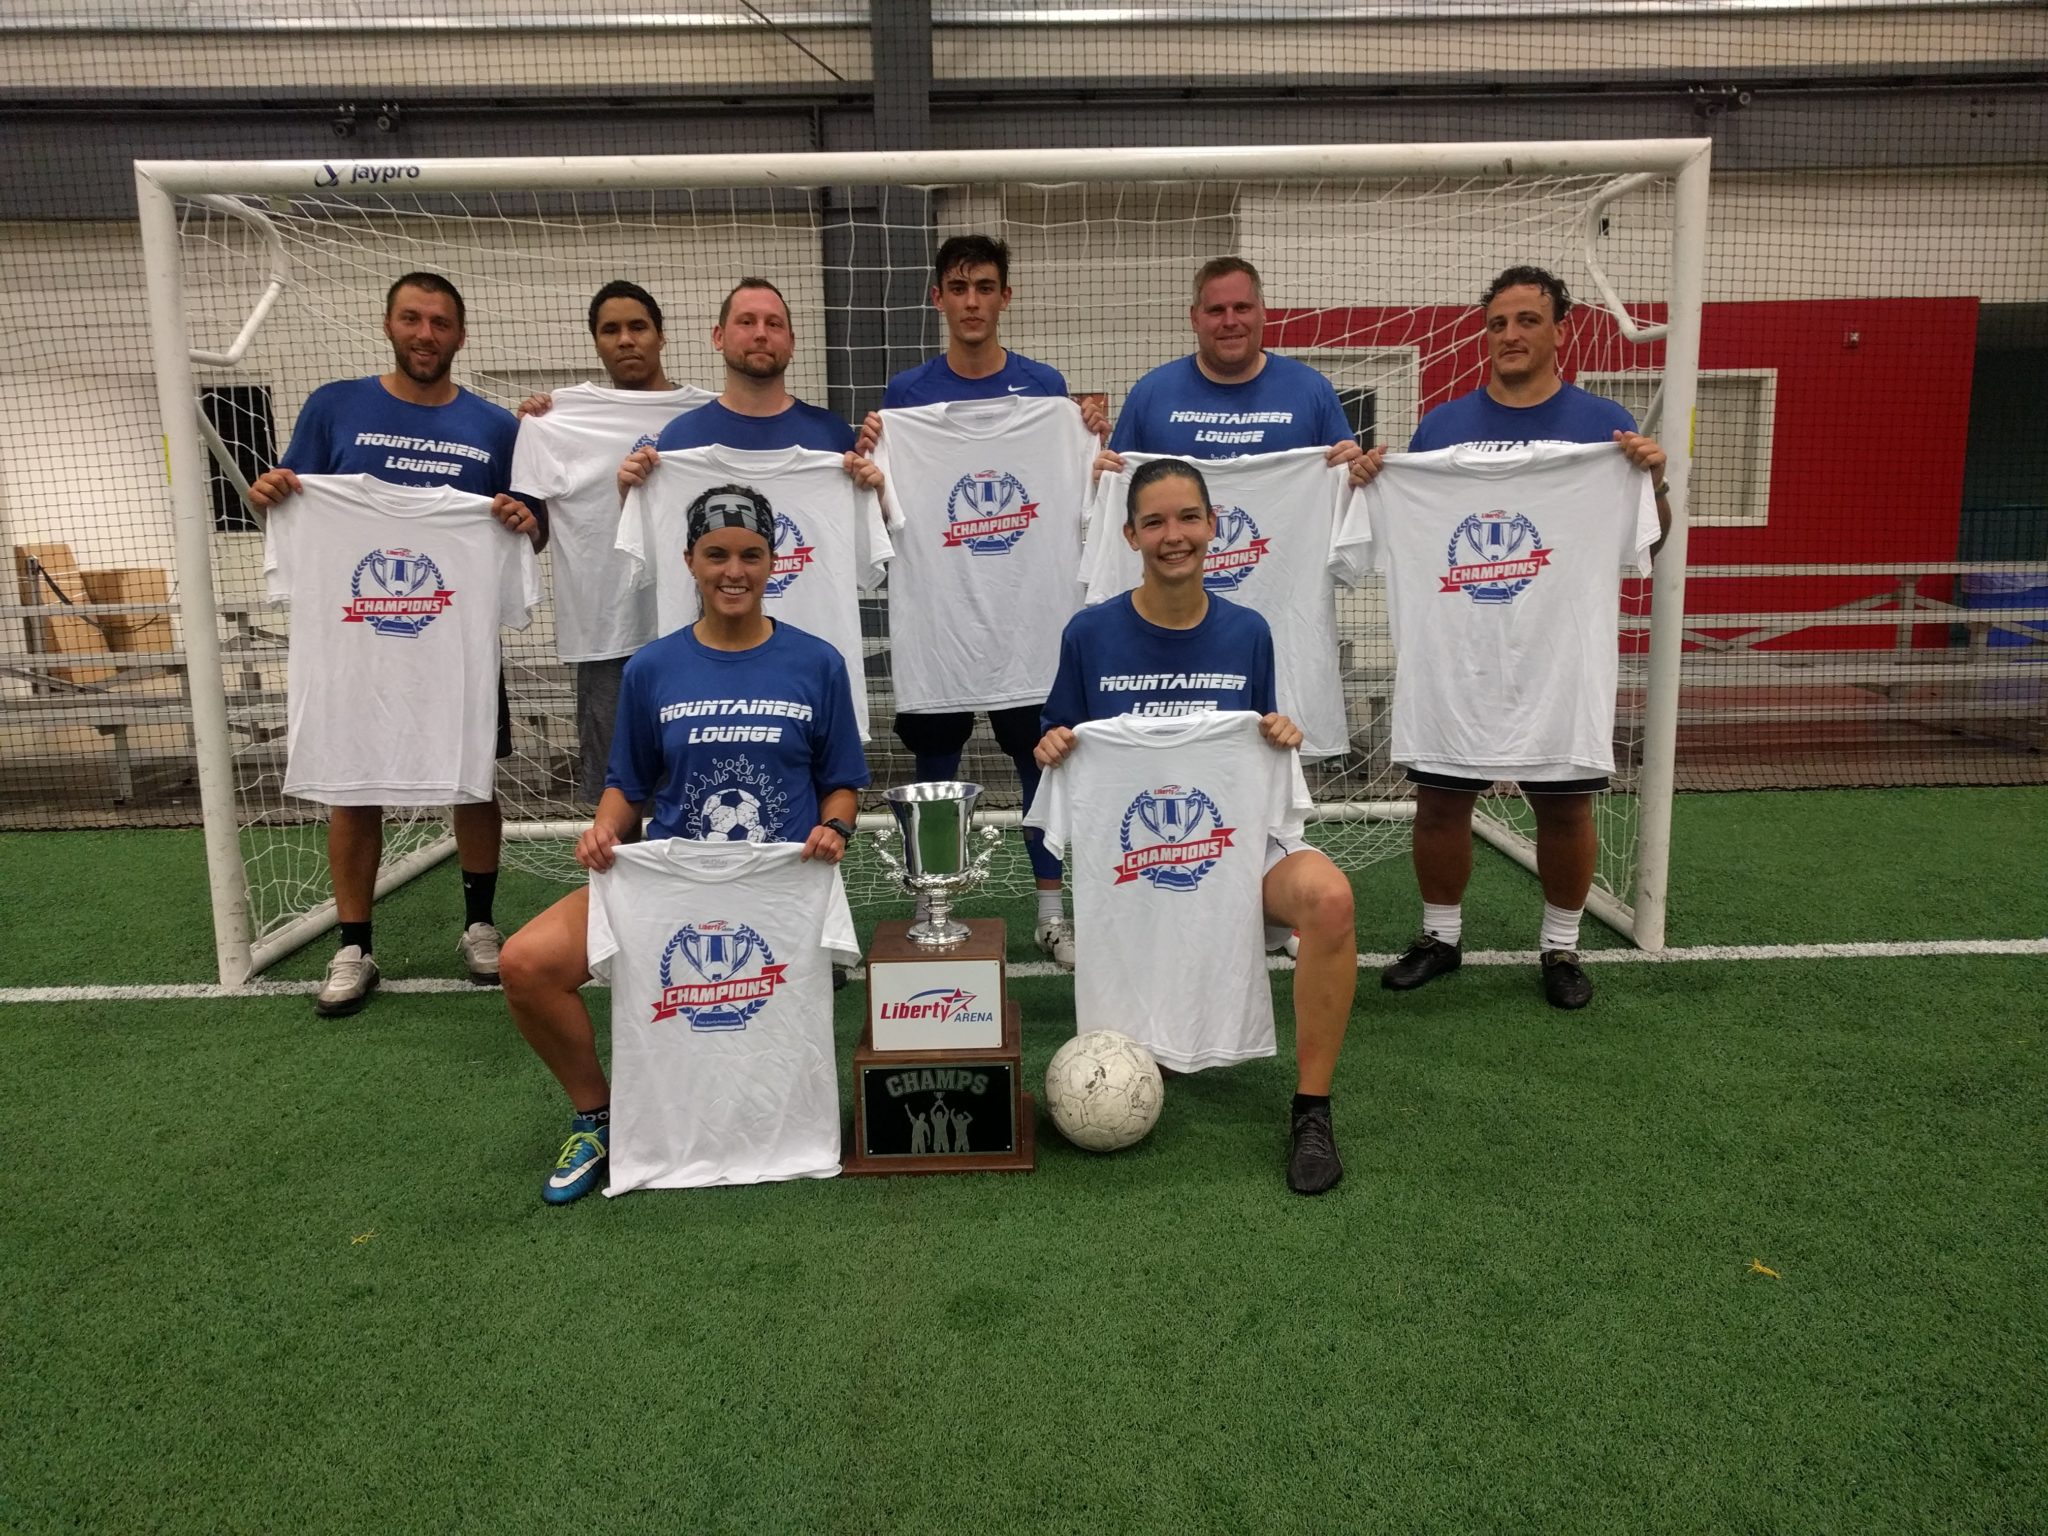 Mountaineer Mondaze crowned Adult League Champions.